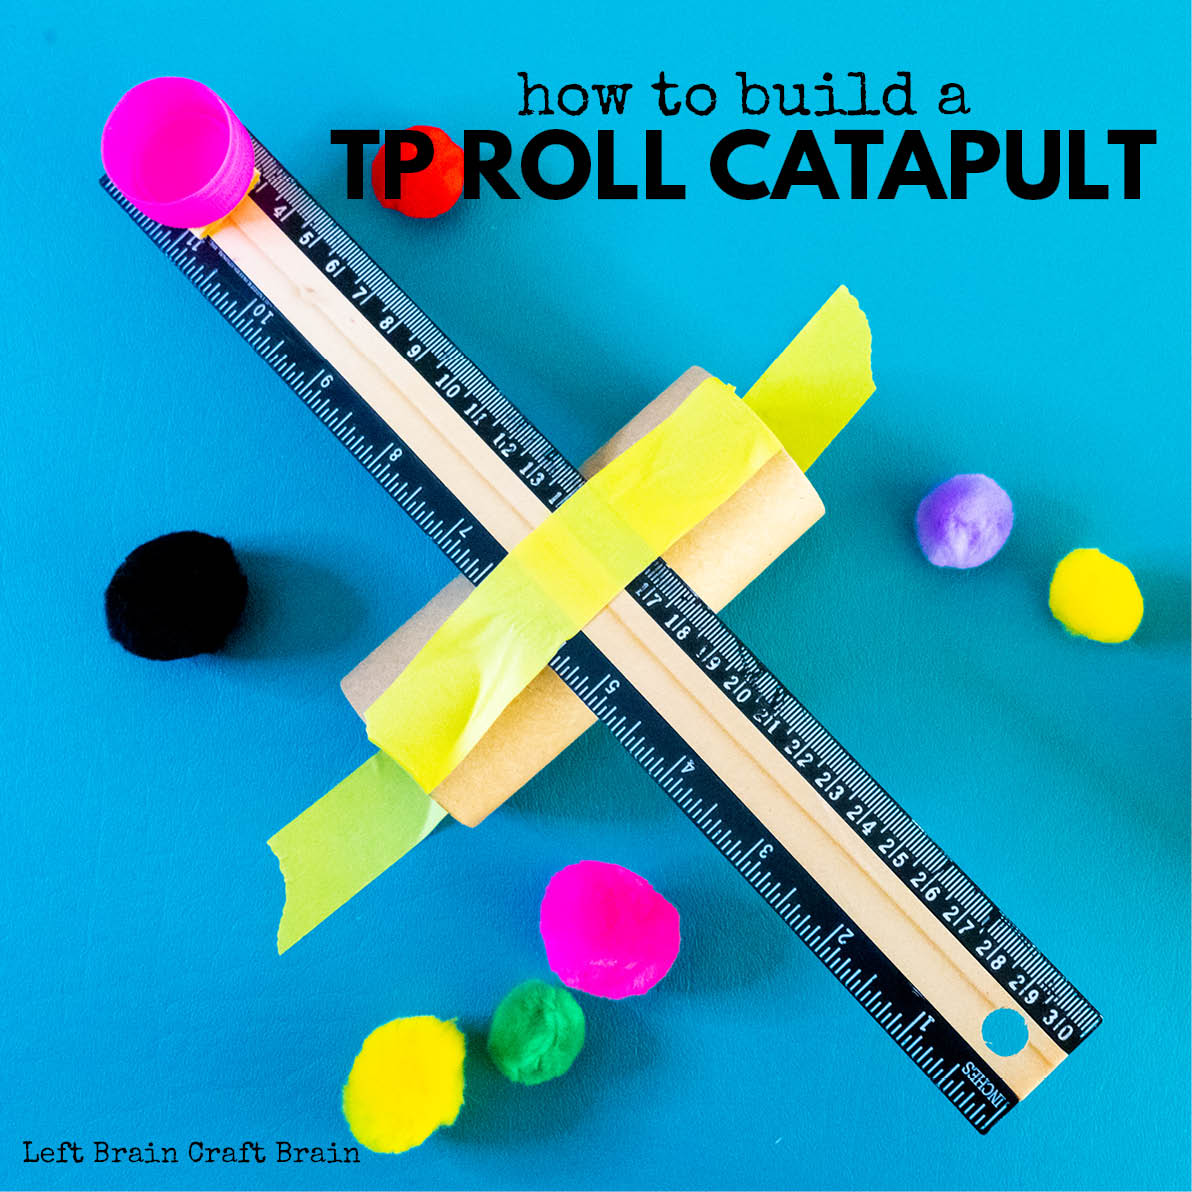 This Toilet Paper Roll Catapult is a fun STEM project for little kids or quick building sessions. Just raid your recycling bin and have fun!